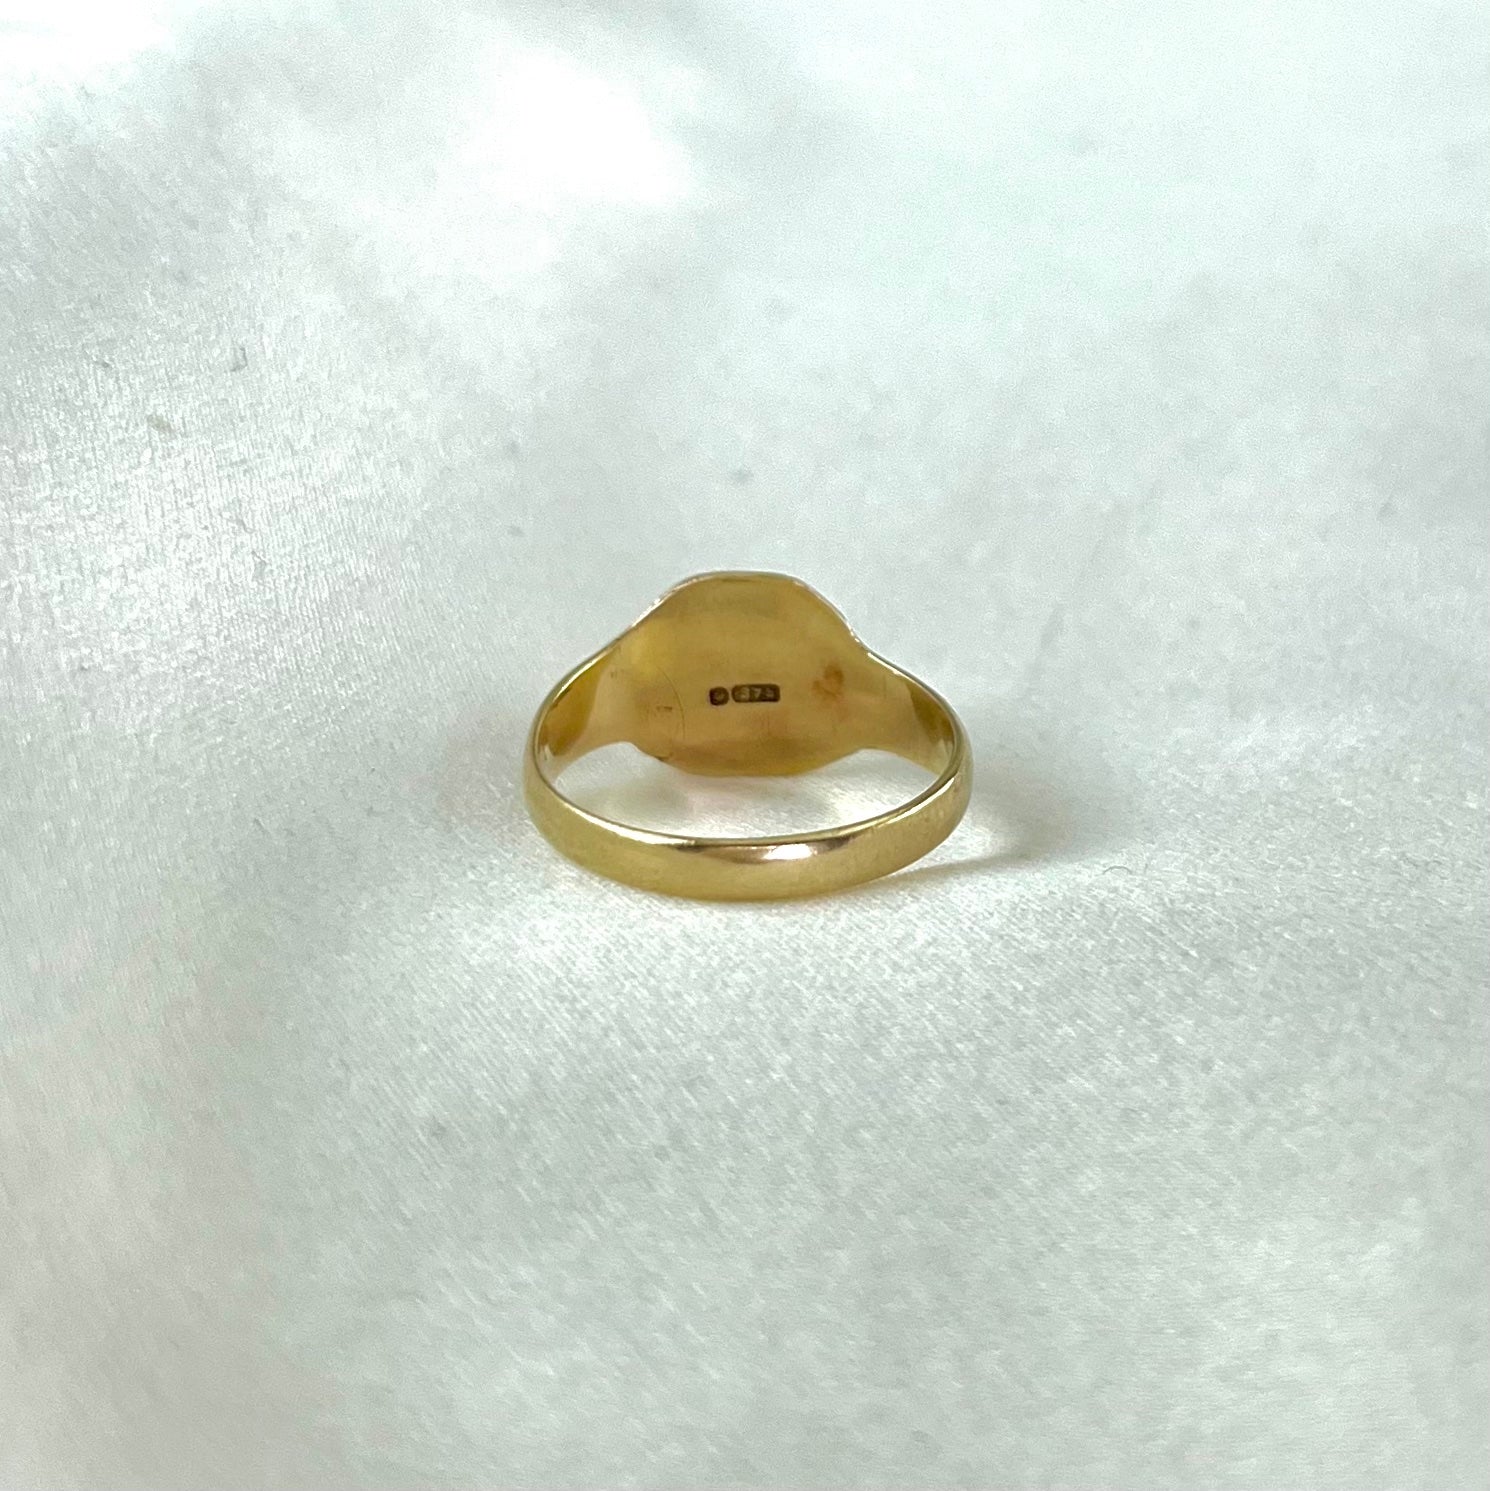 Vintage 1930s Solid 9ct Yellow Gold Signet Ring 1930s, Size L + 0.5